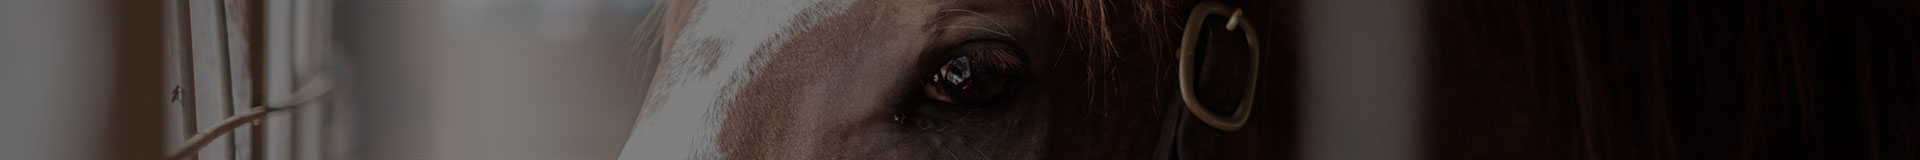 picture of horses eye with halter buckle